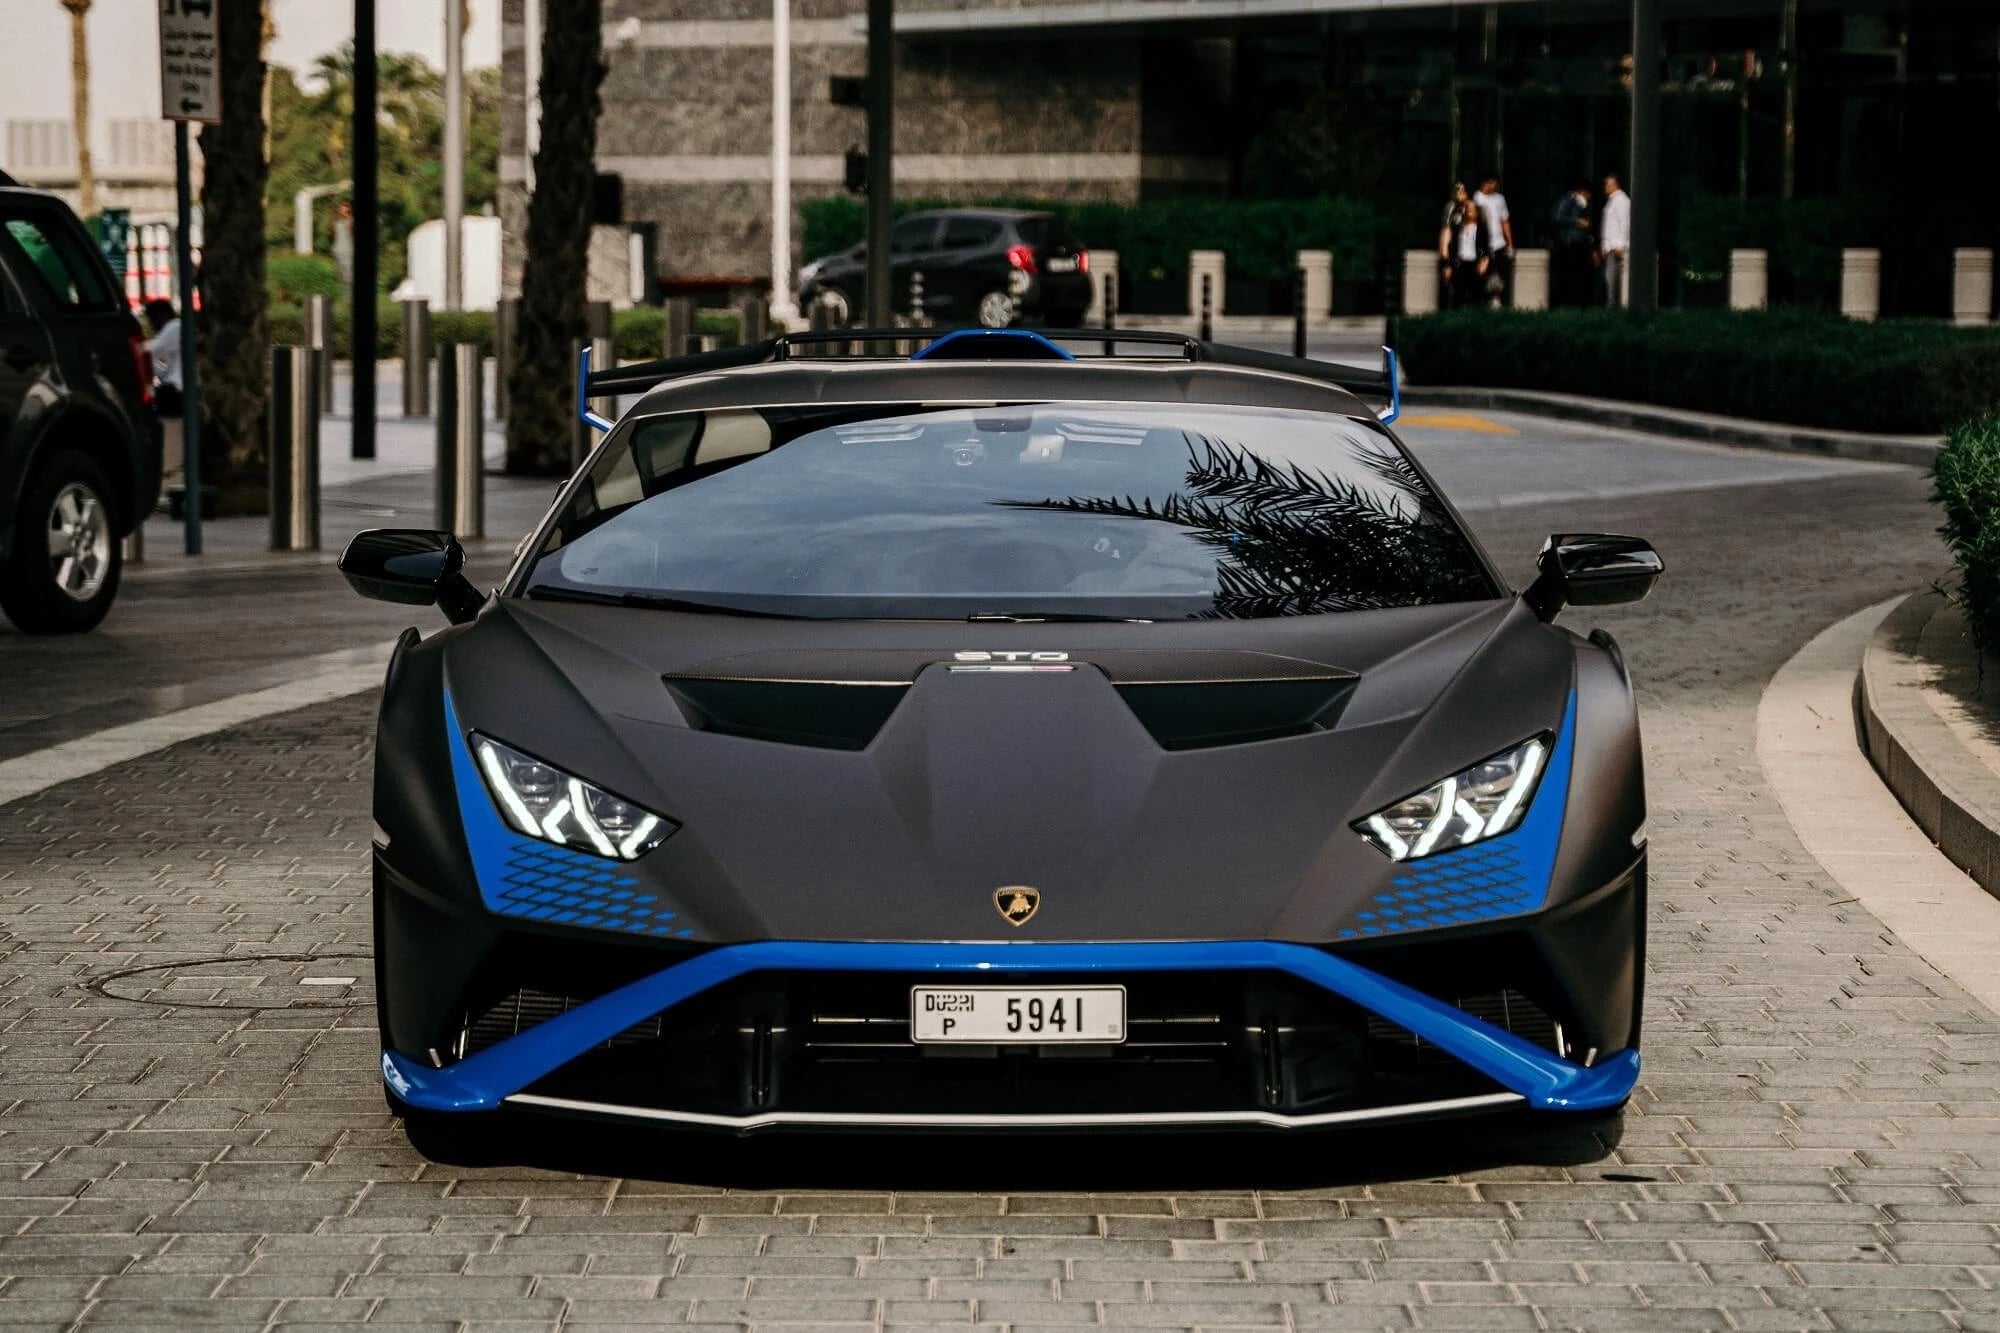 Experience the thrill of a 2022 Lamborghini Huracan STO Black Matt in Dubai. This luxury supercar boasts 640 horsepower, accelerates from 0 to 100 km/h in 2.8 seconds, and reaches a maximum speed of 310 km/h. With automatic transmission, feel the adrenaline on Dubai's roads. Enjoy an intimate driving experience with two seats for exclusivity.